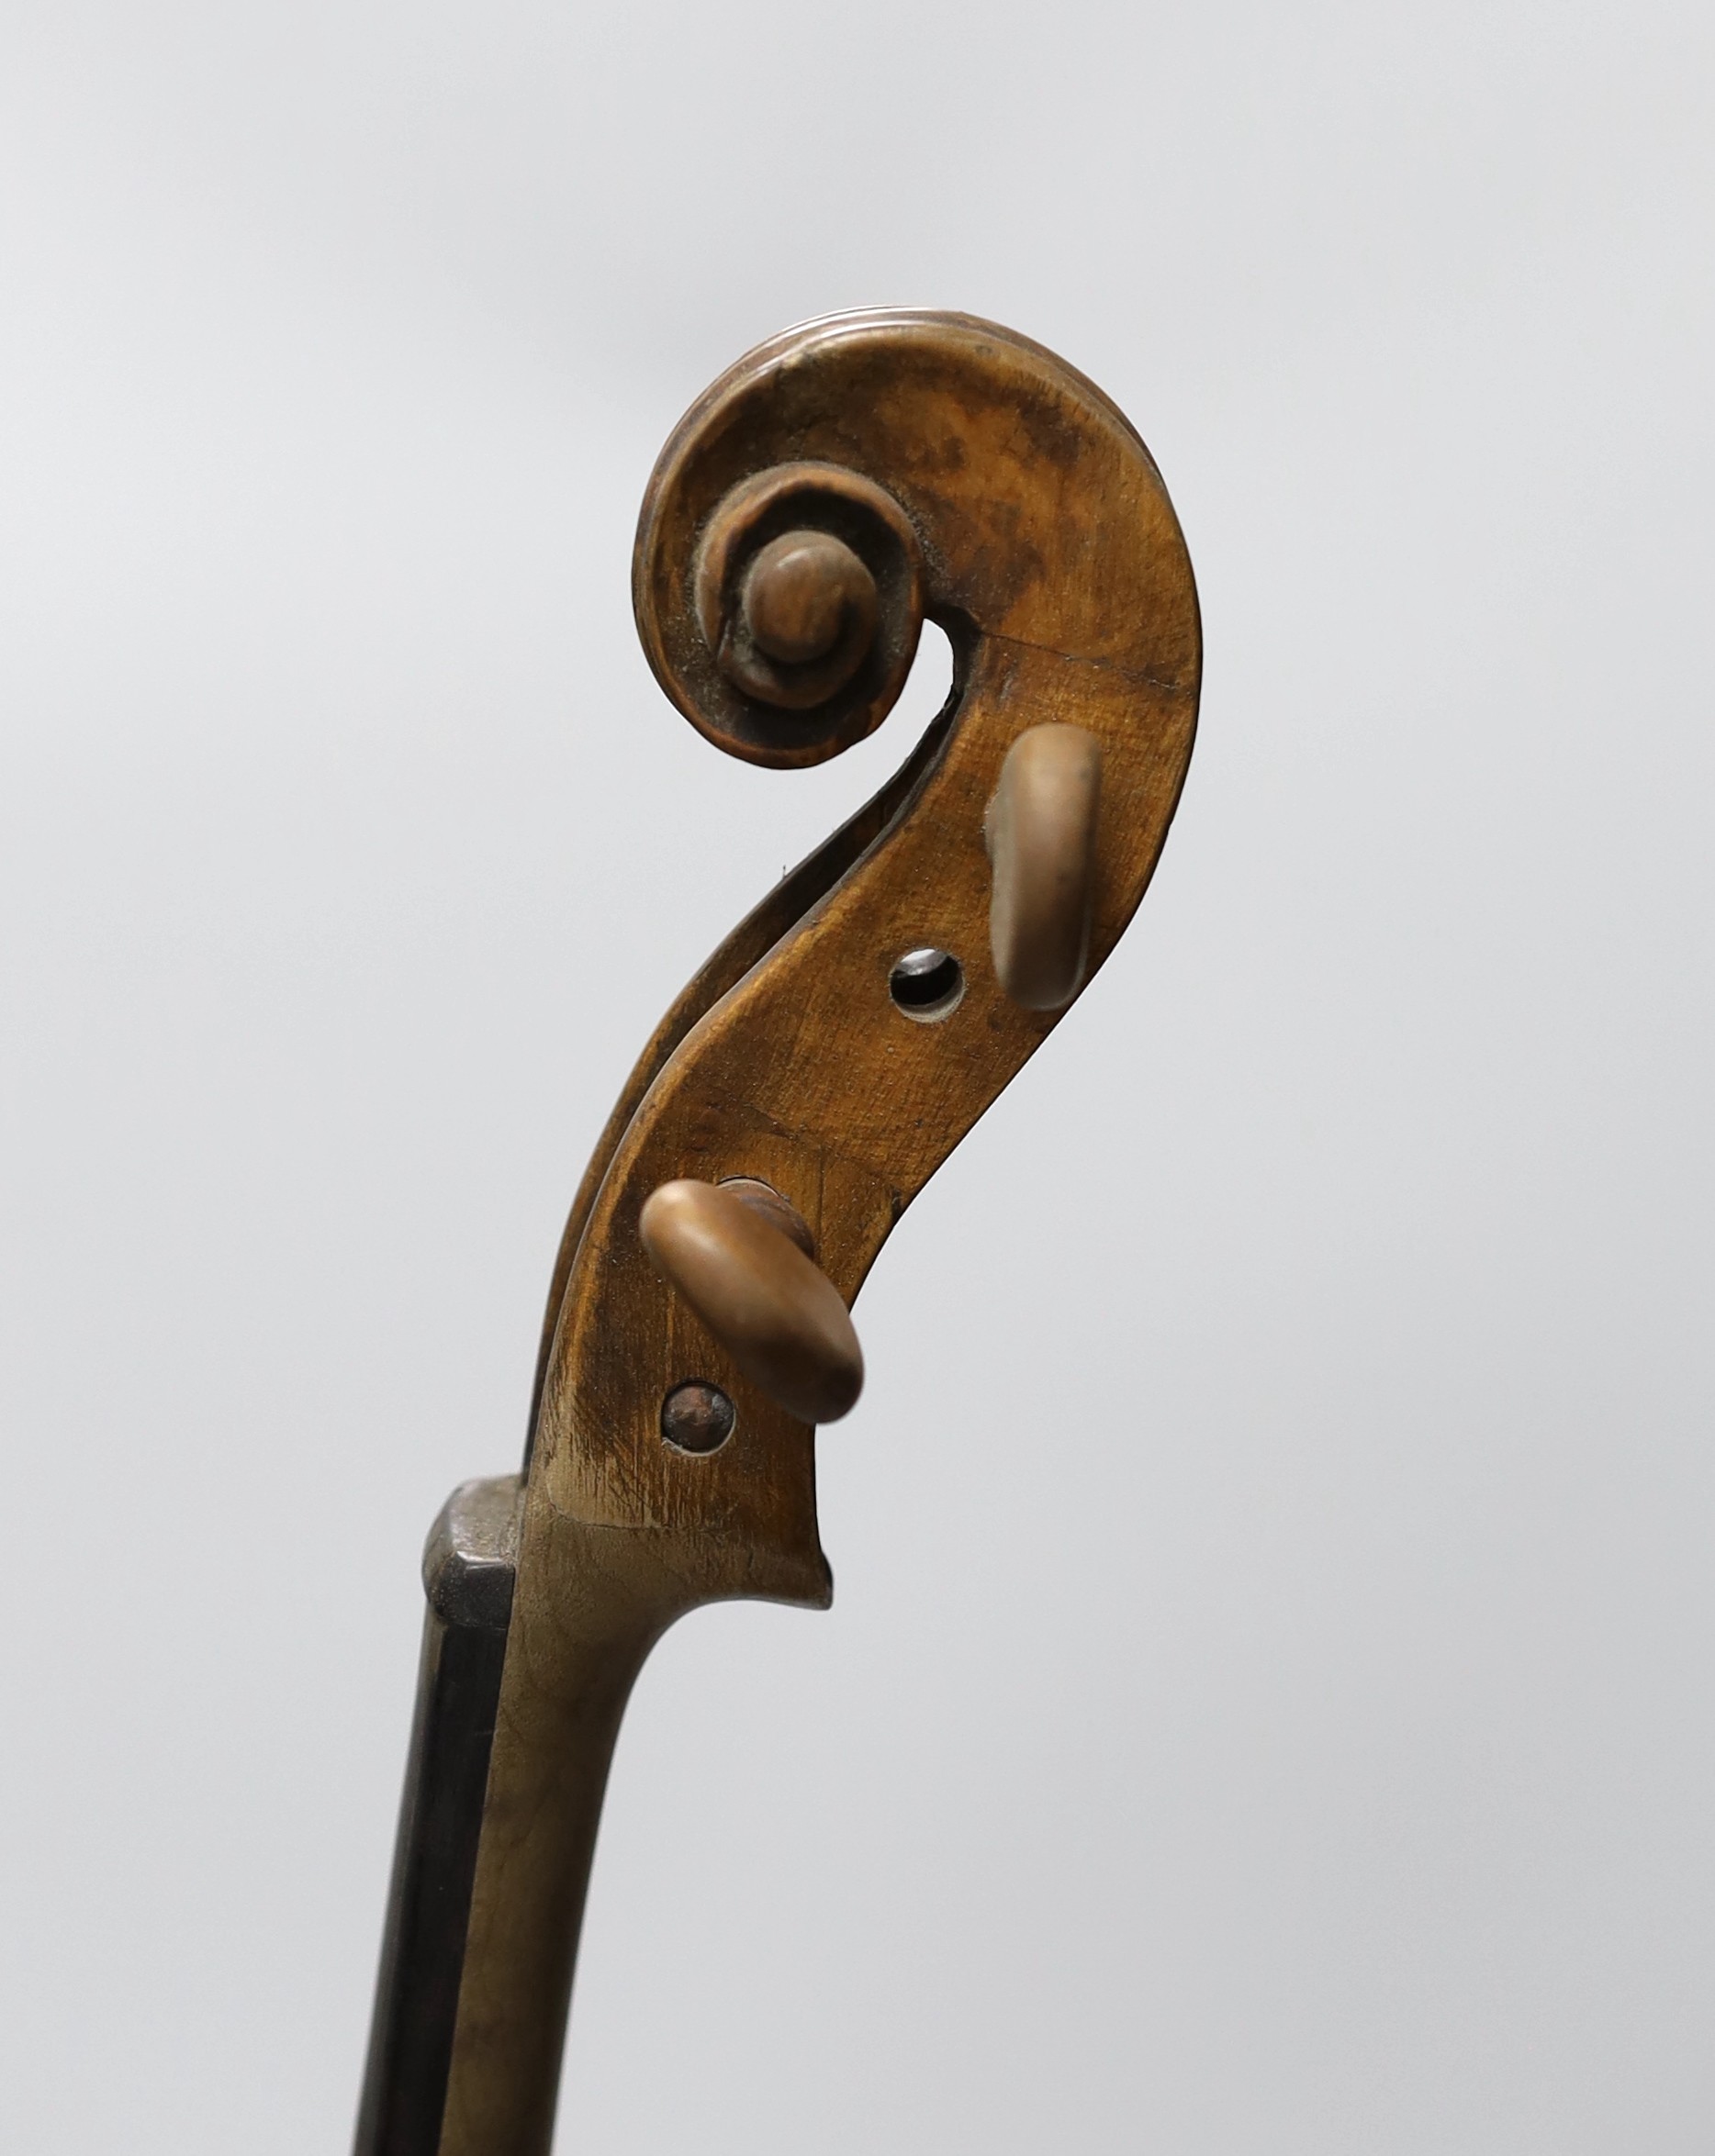 An 18th century German violin labelled Martin Leibmuller Mittenwalde, length of back 14ins, with a Cuniot-Hury Mirecourt bow (cites)